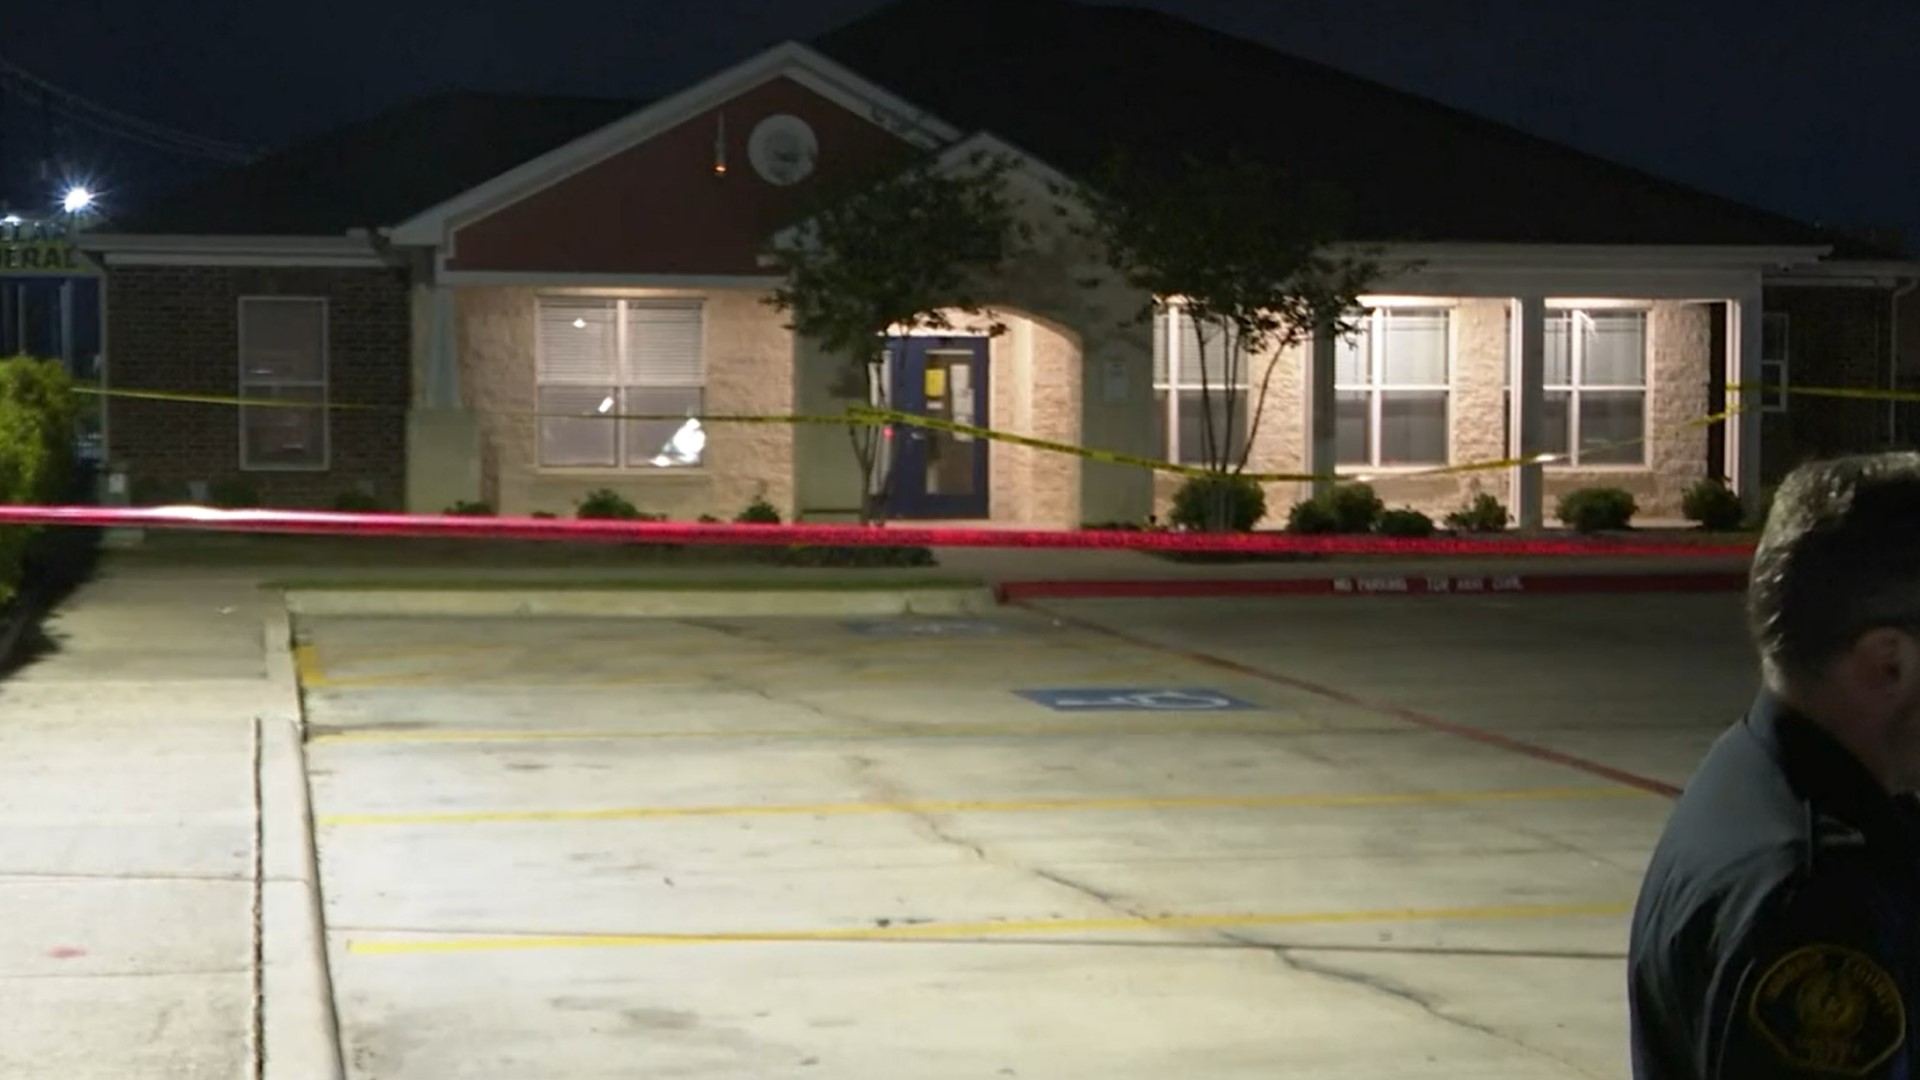 A child is in critical condition after being shot in northeast Harris County Wednesday night, according to Sheriff Ed Gonzalez.